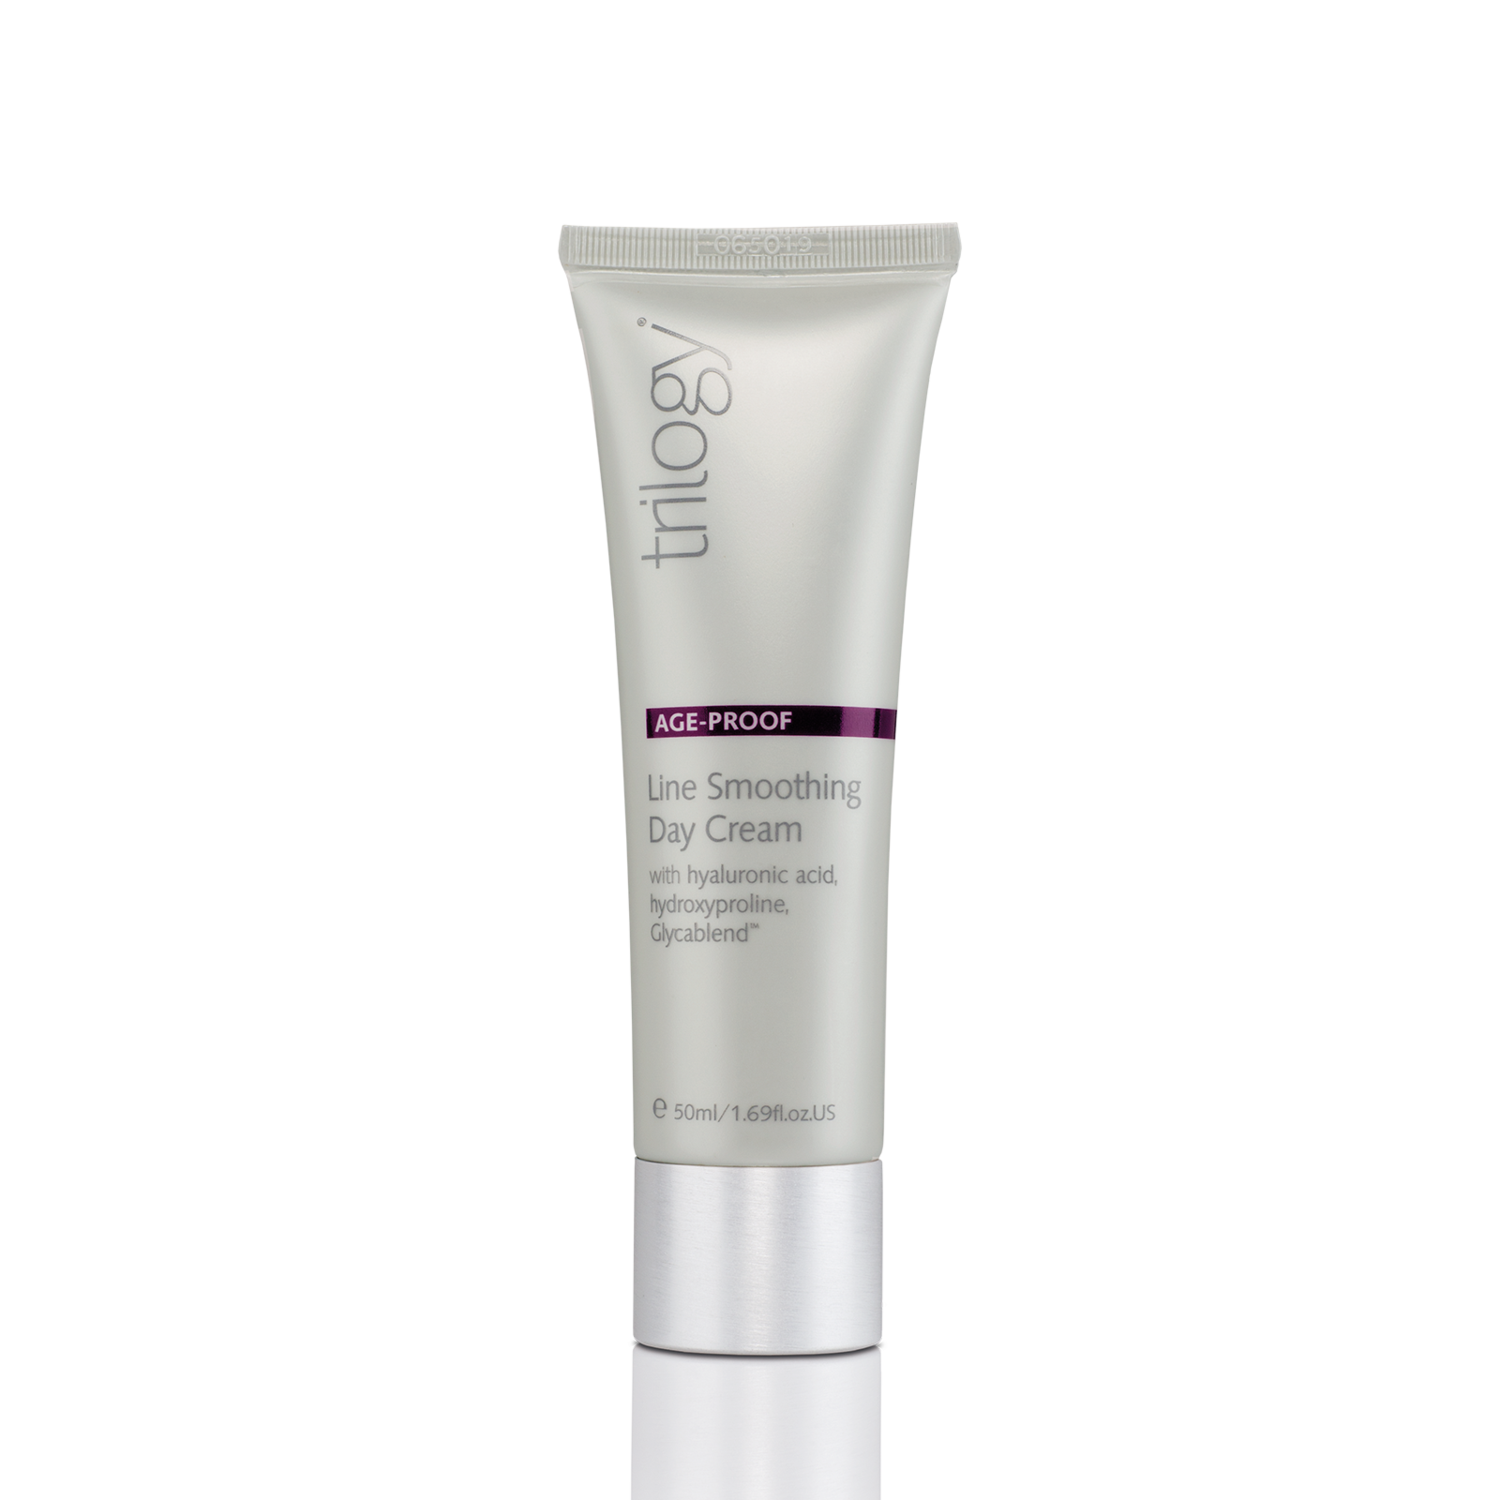 Trilogy Age Proof Line Smoothing Day Cream - 50ml